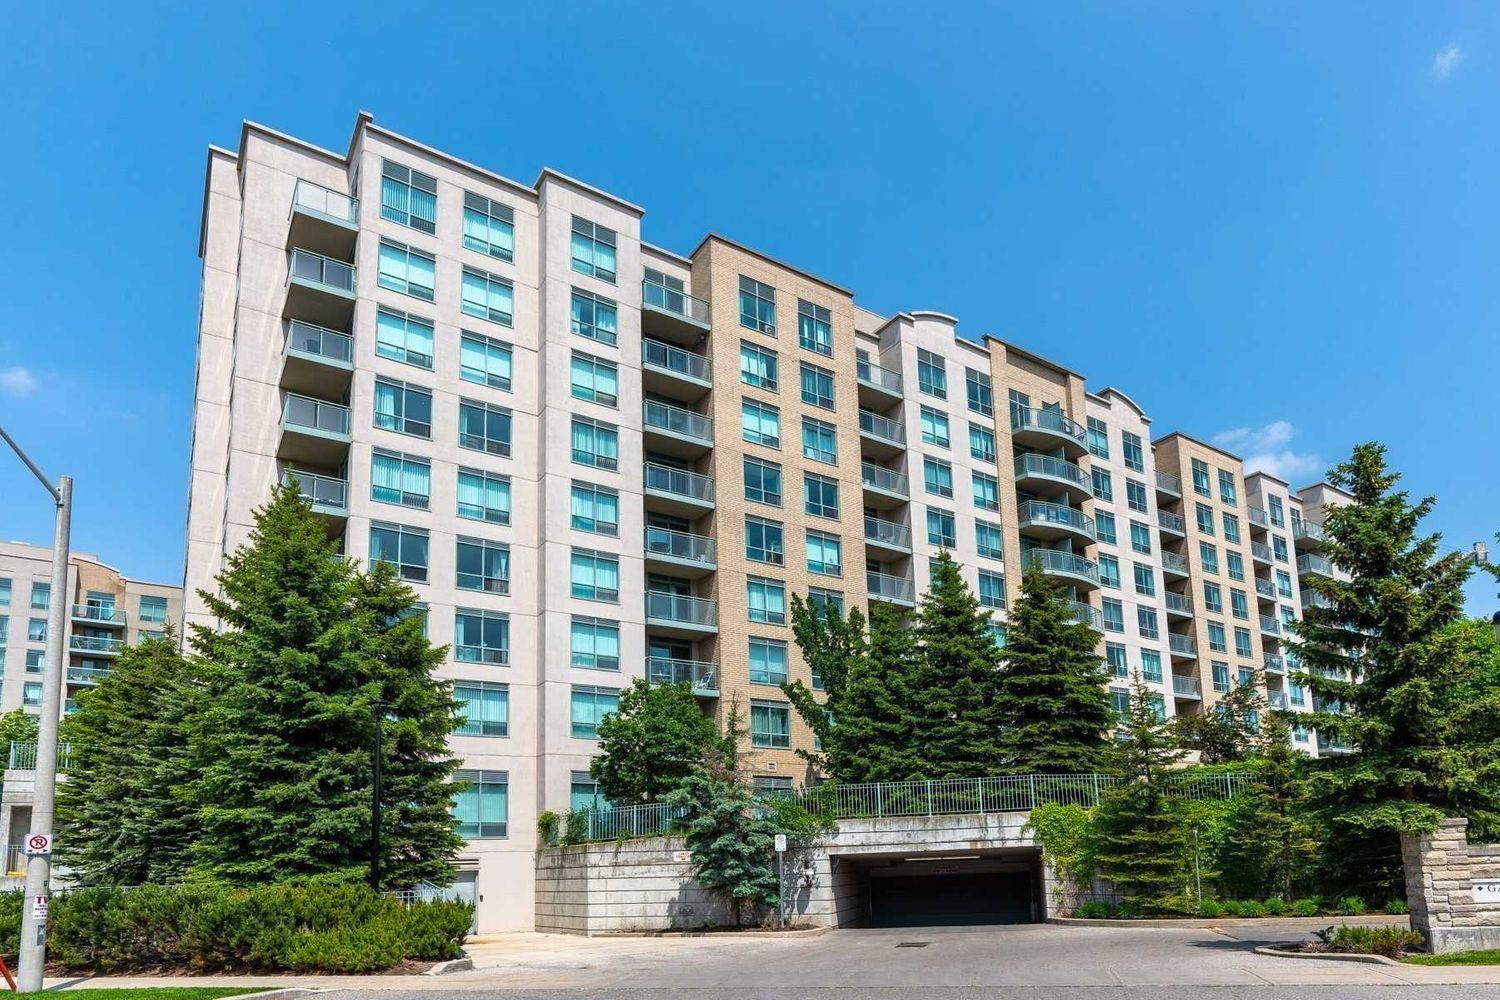 51 Baffin Court. The Gates of Bayview Glen II Condos is located in  Richmond Hill, Toronto - image #2 of 3